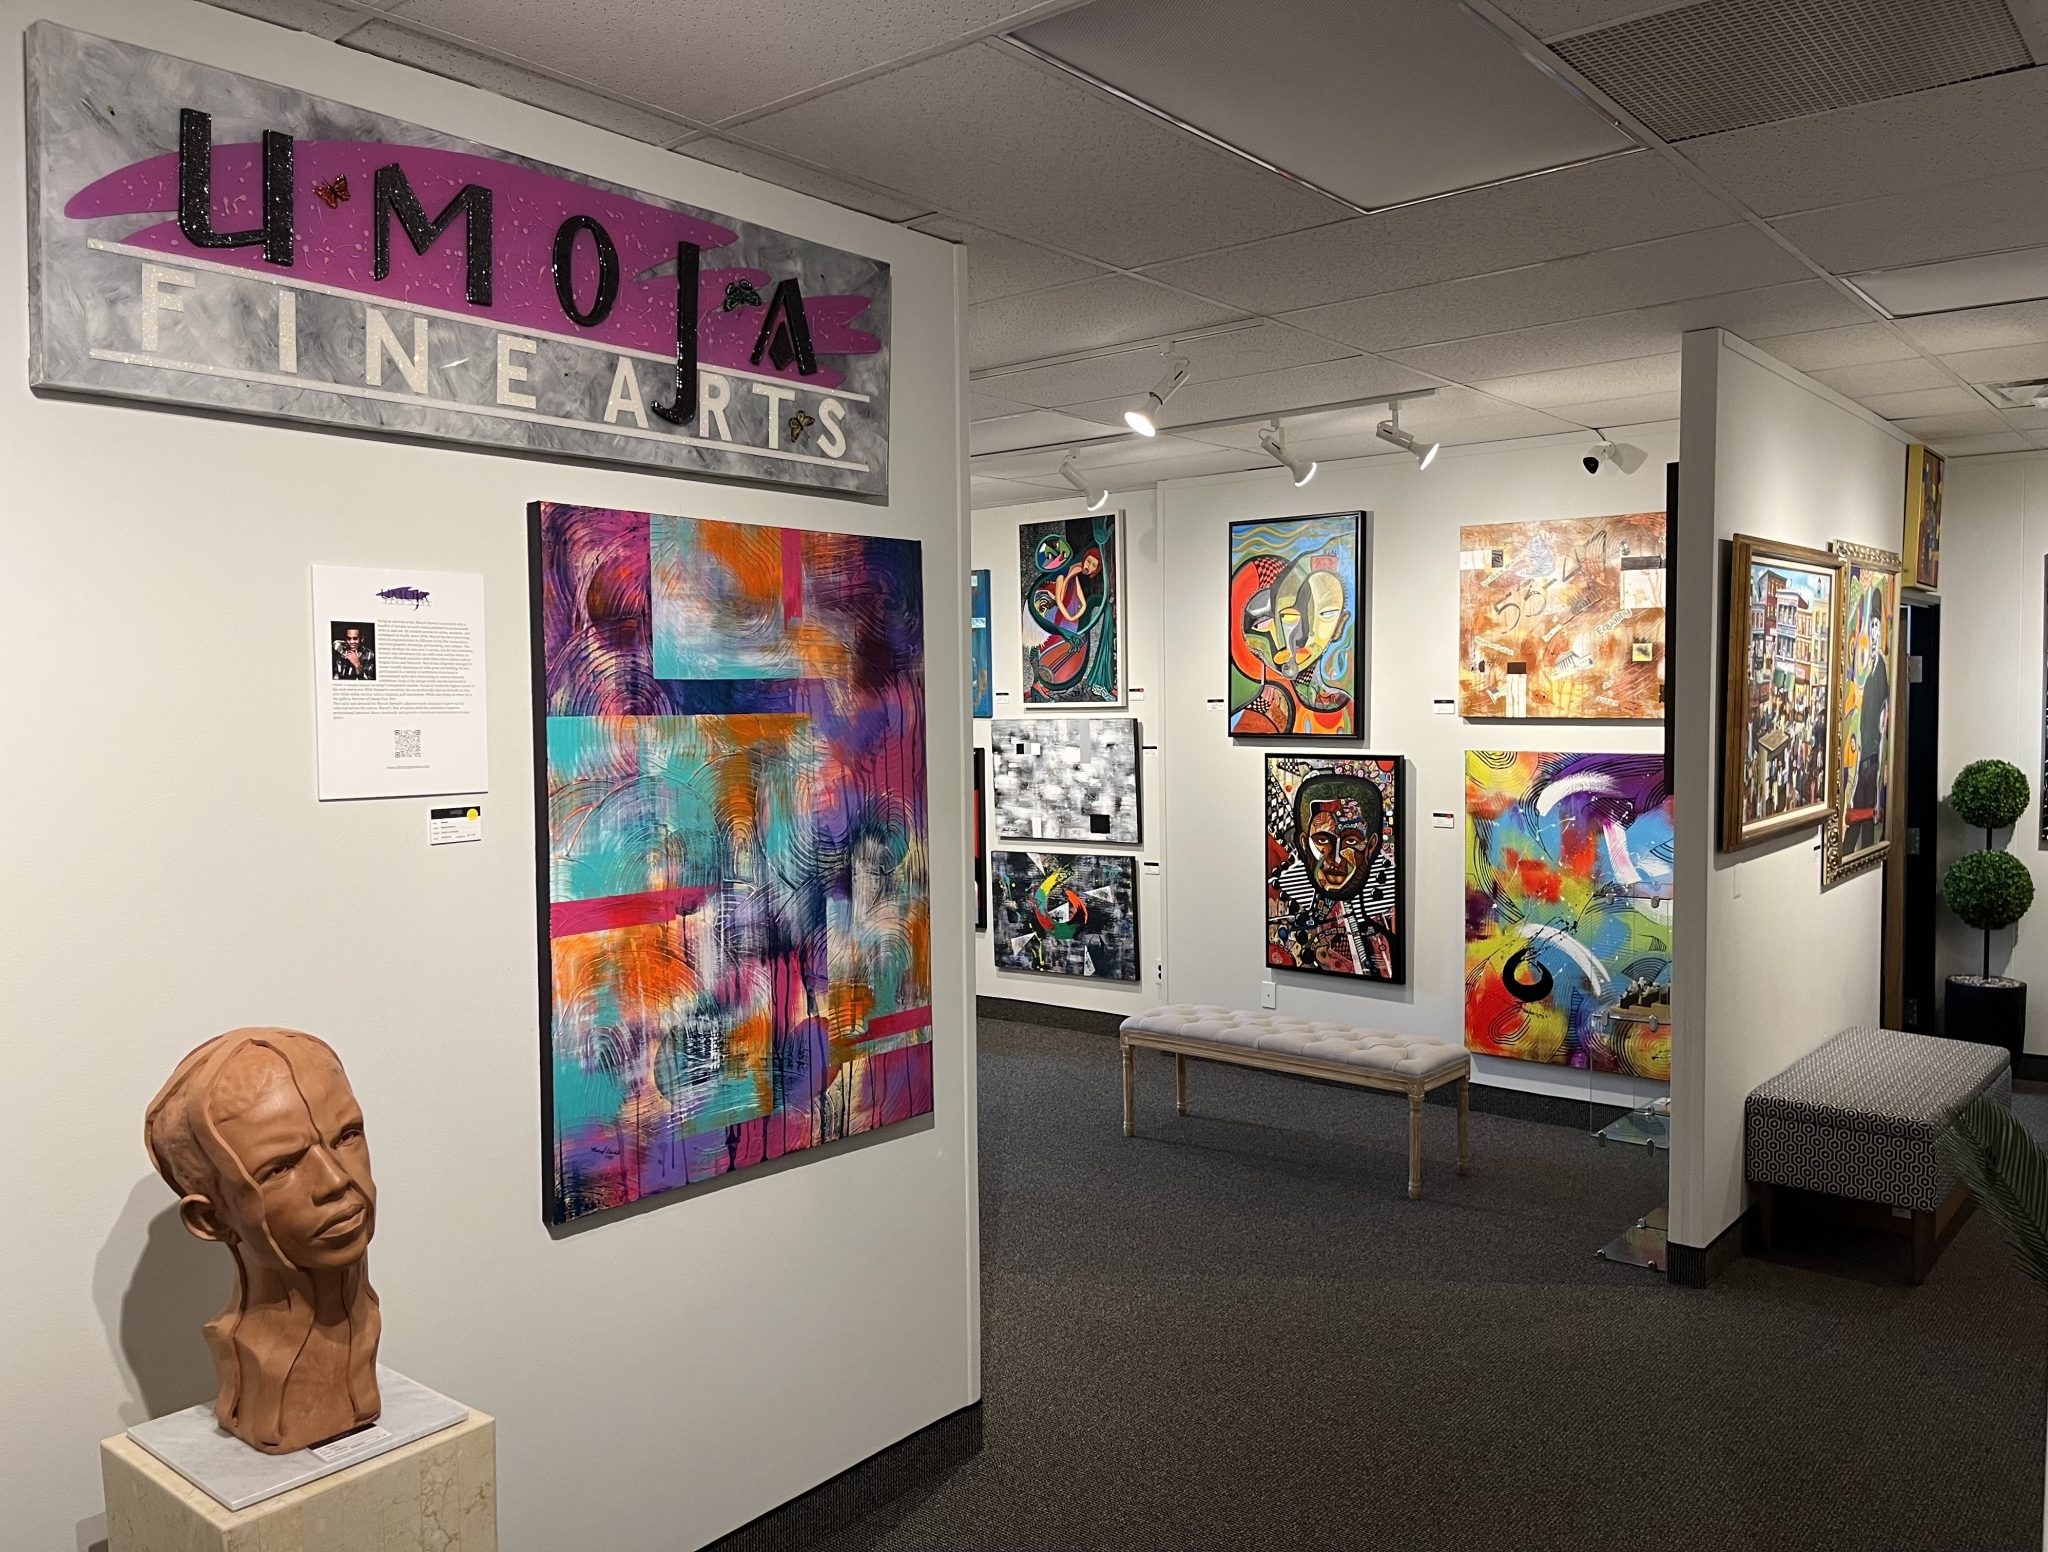 interior of an art gallery with colorful paintings and sculptures against white walls